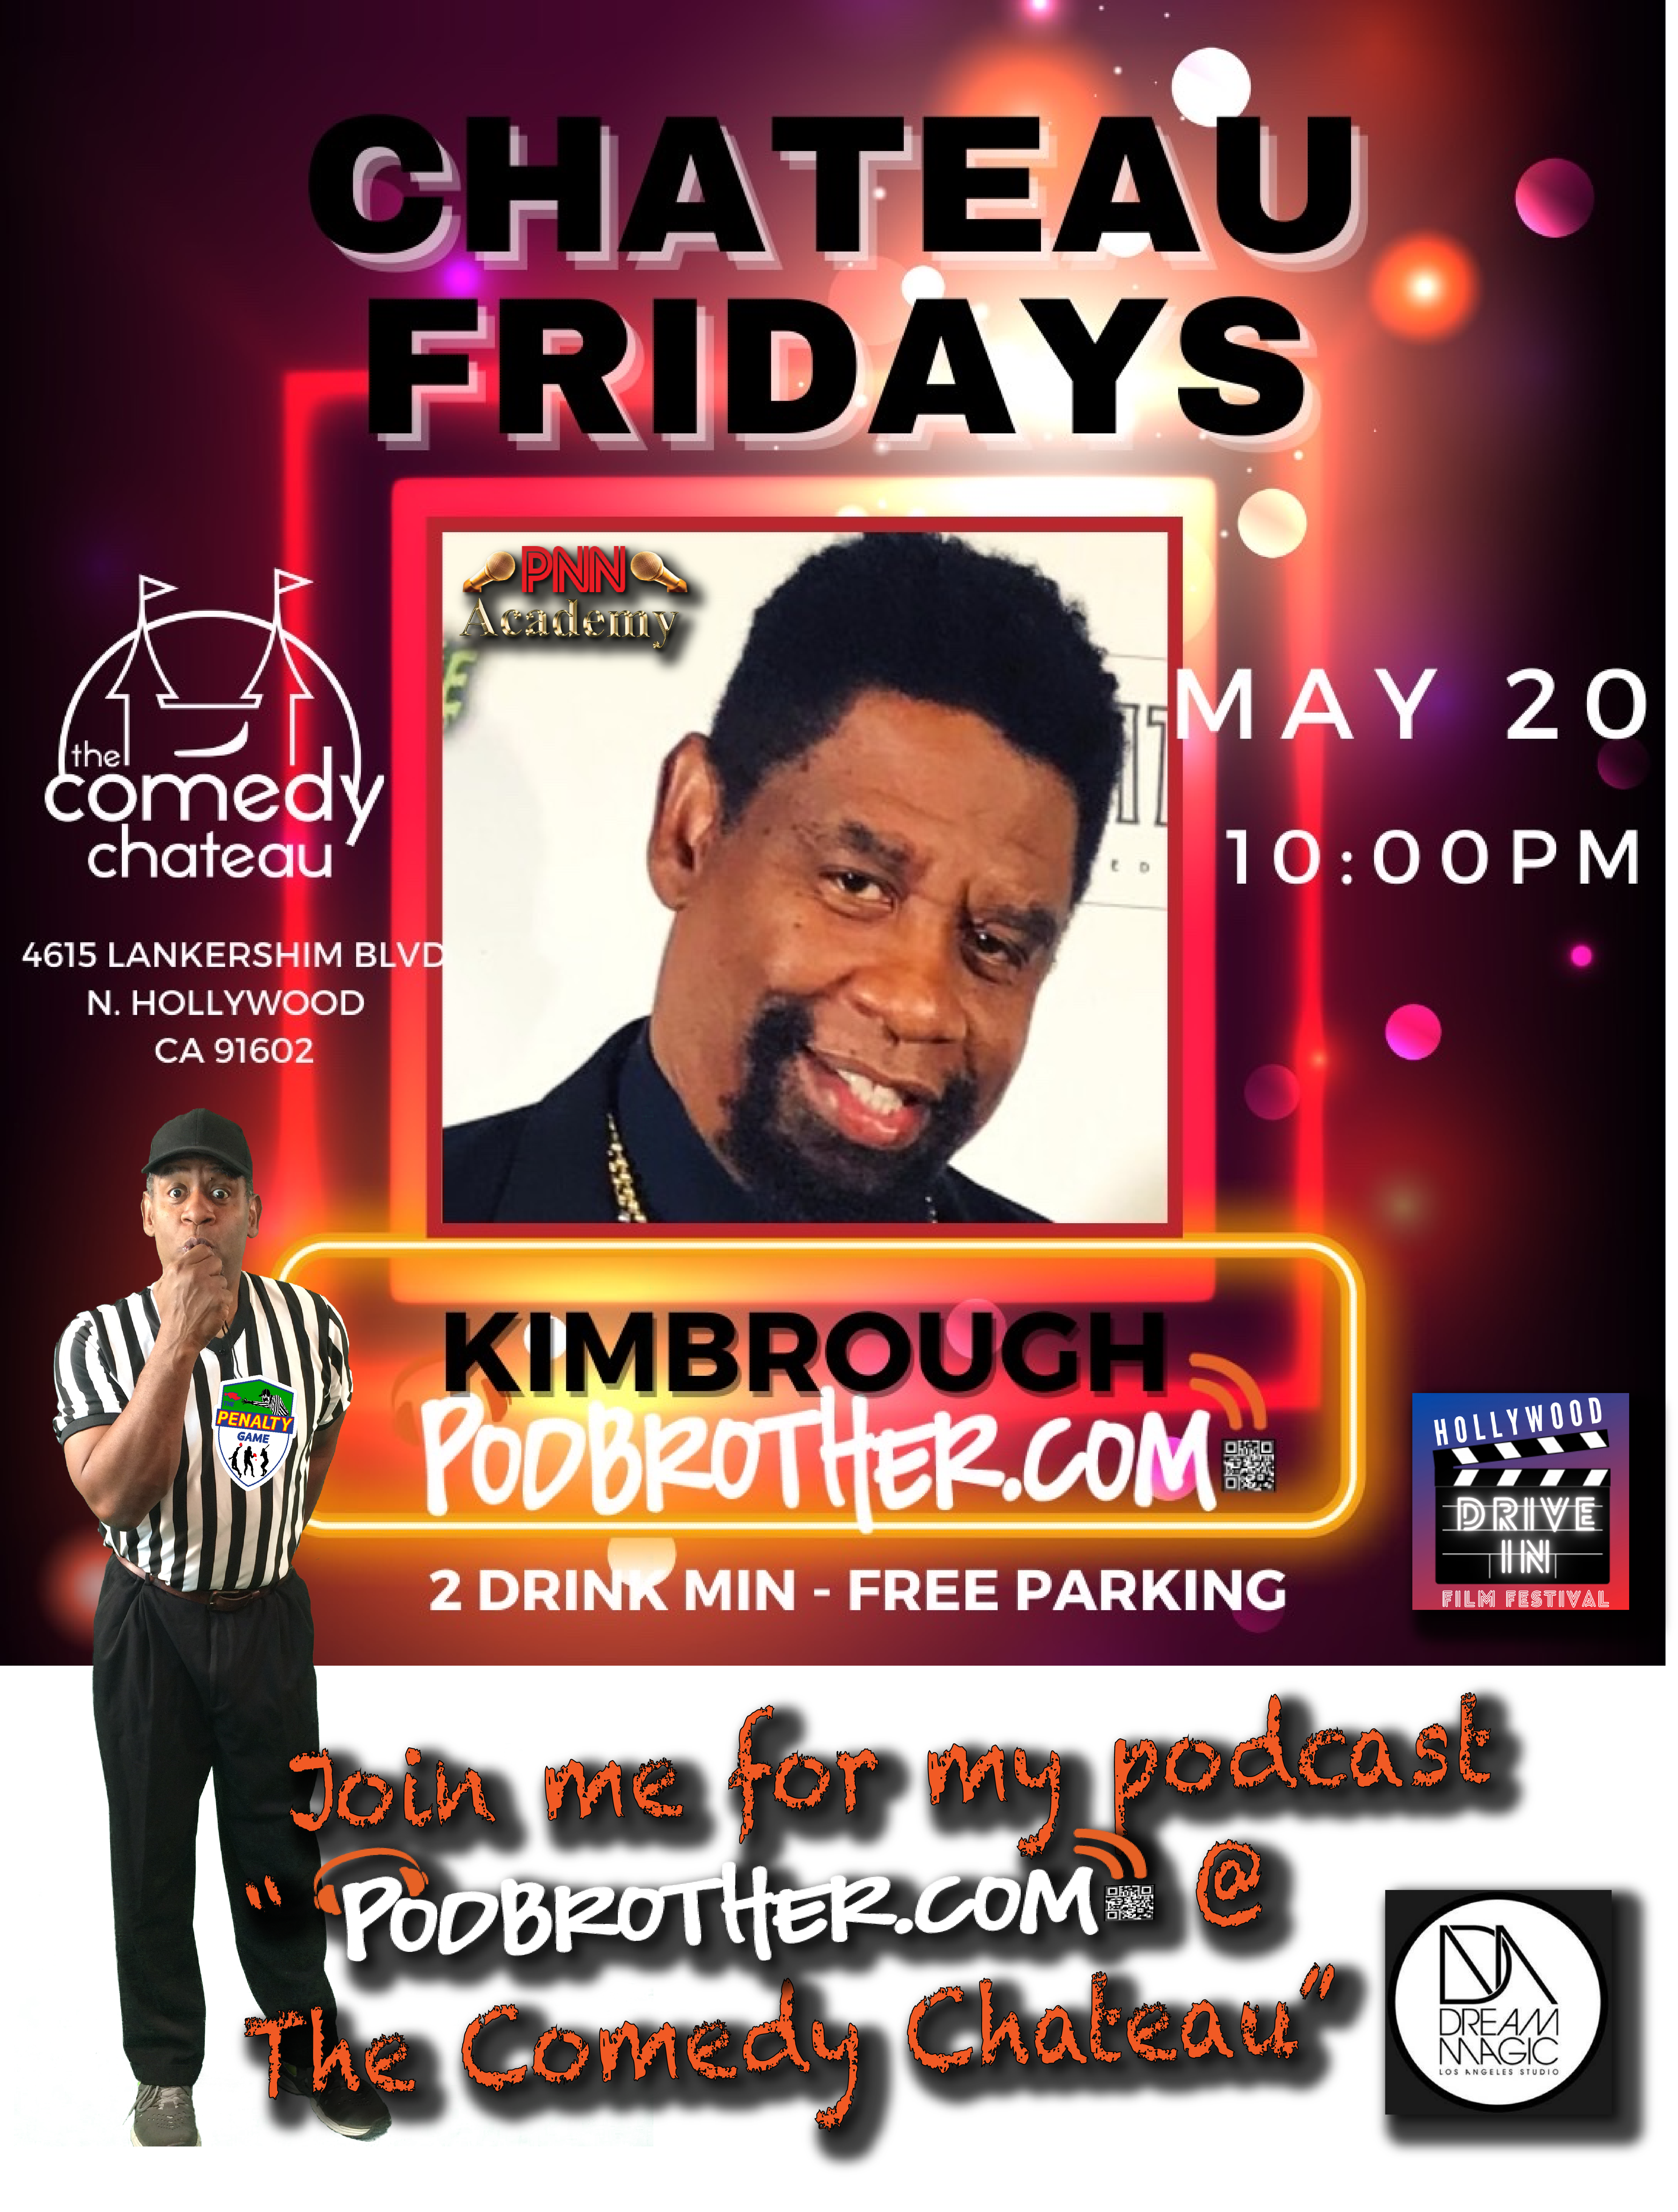 #kimbrough, #podbrother, #thecomedychateau, #refkimbrough